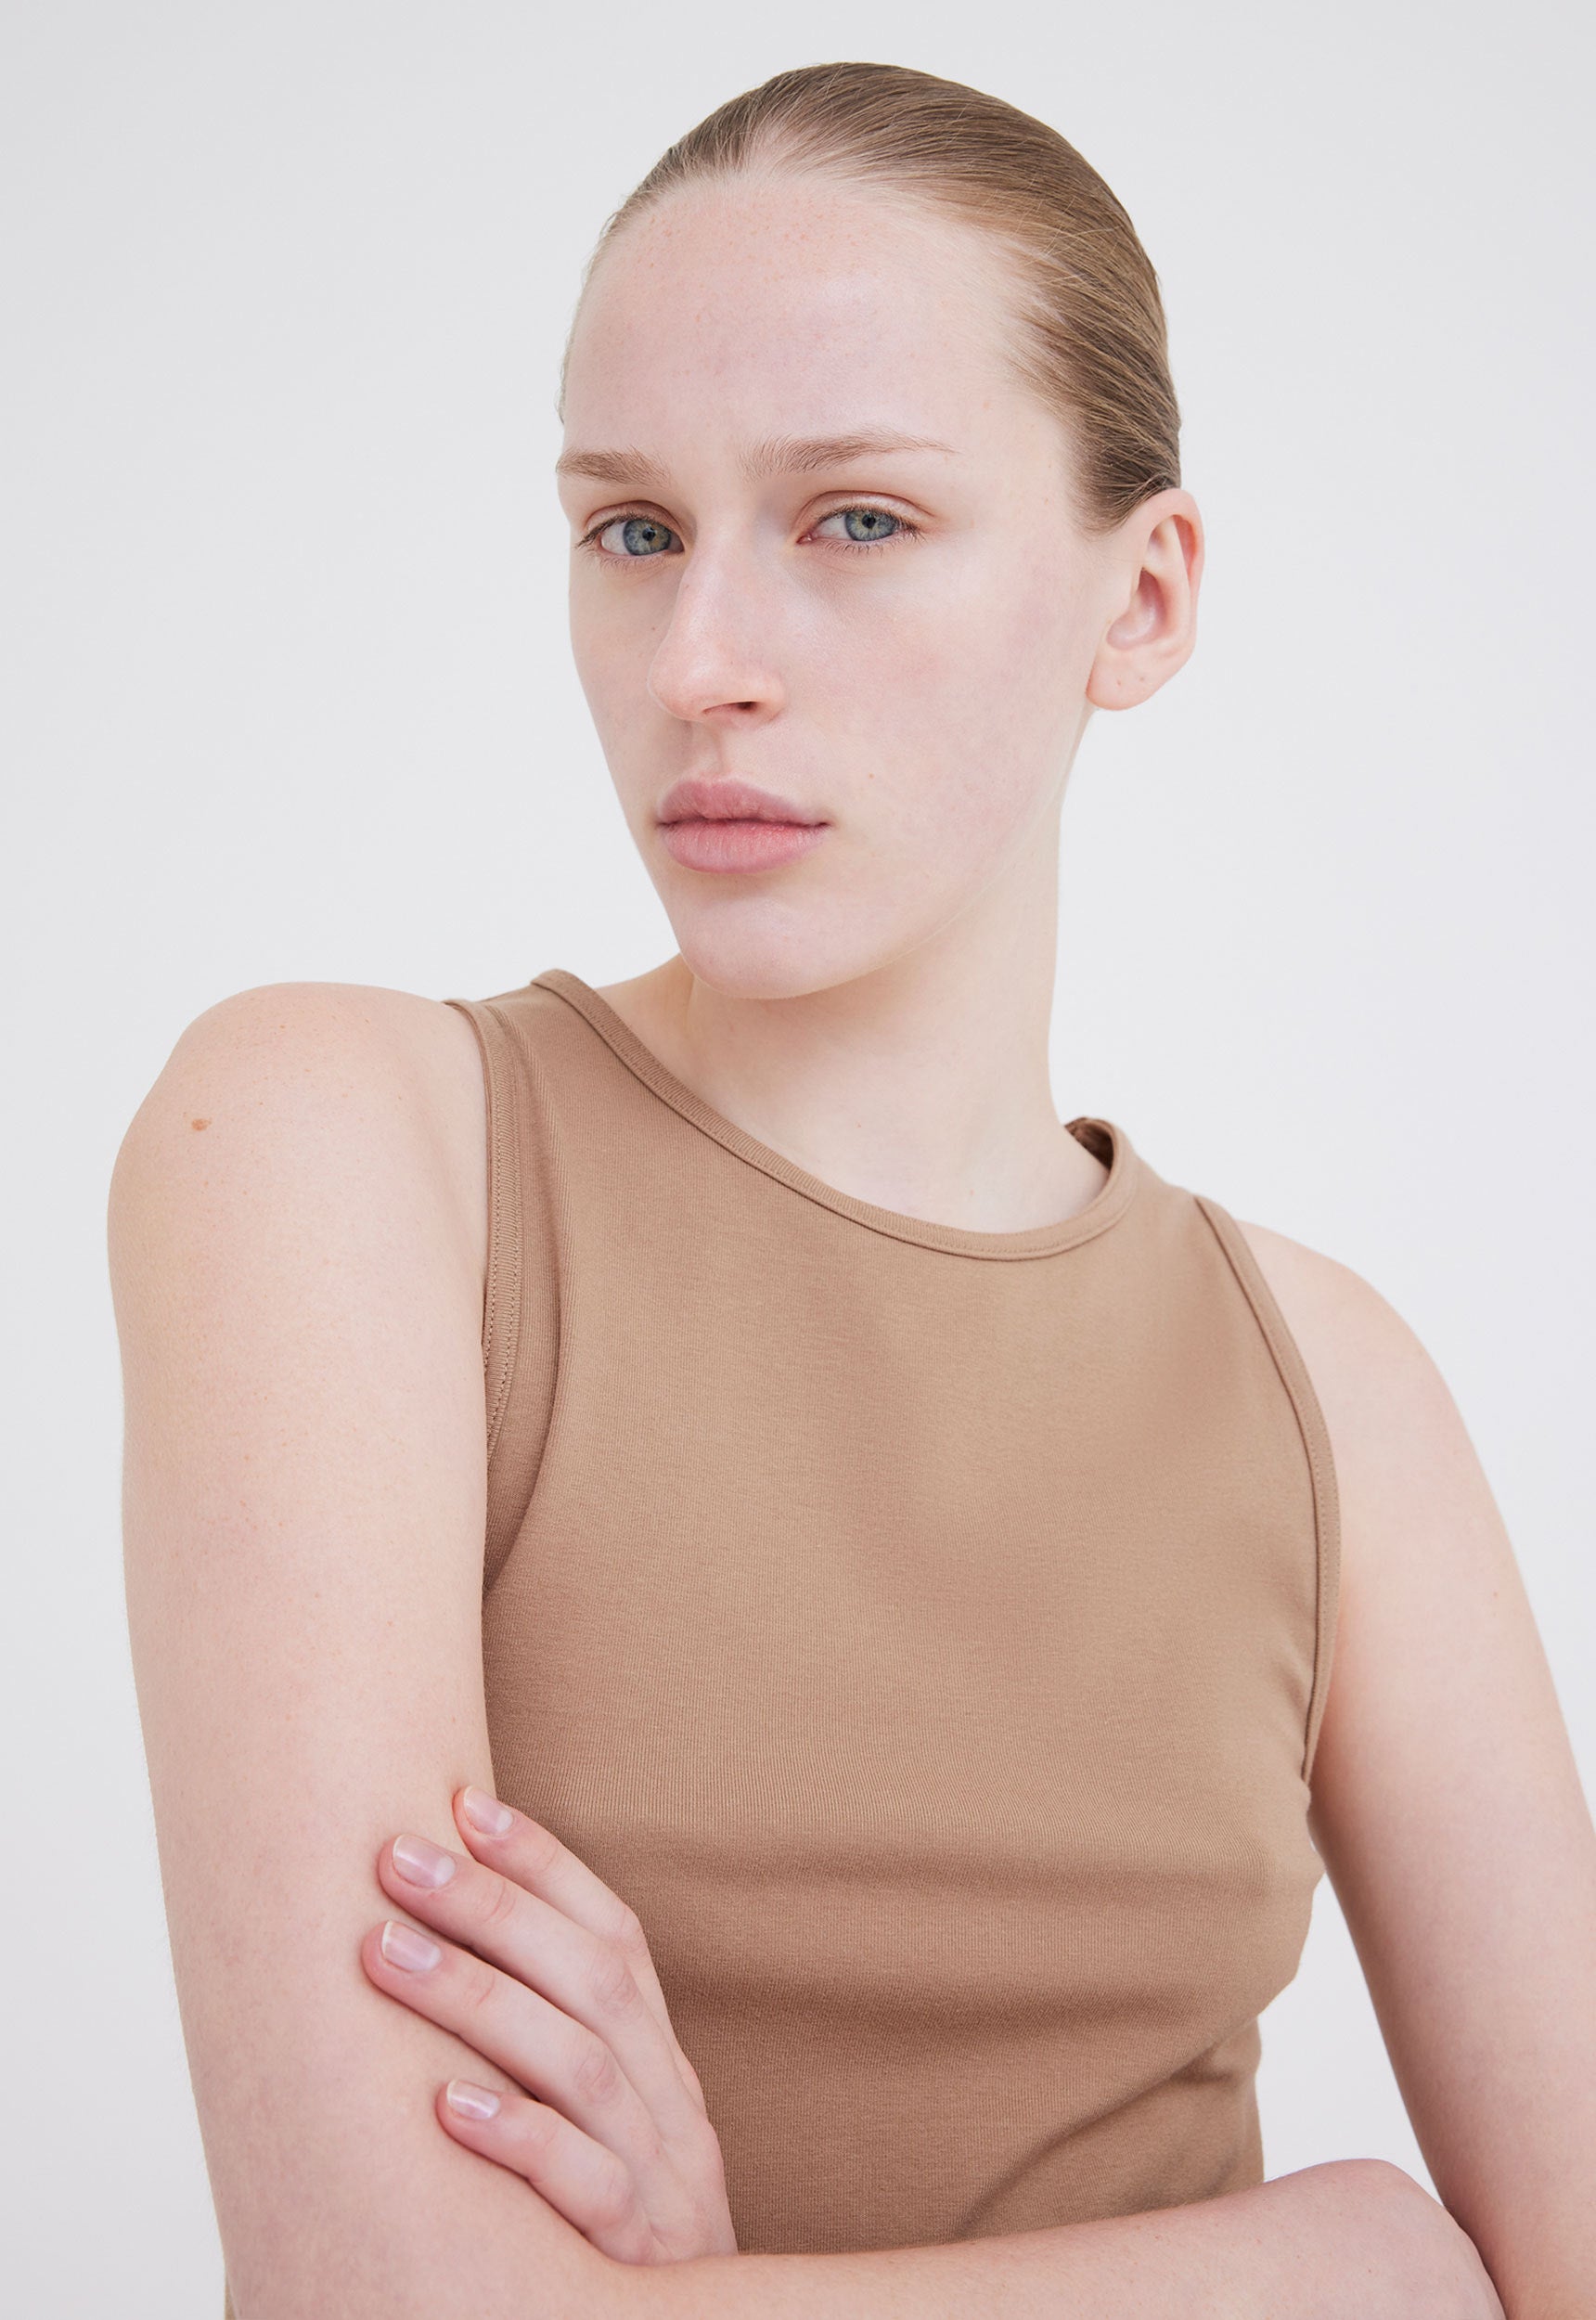 Foster Ribbed Cotton Tank in Upstate Tan